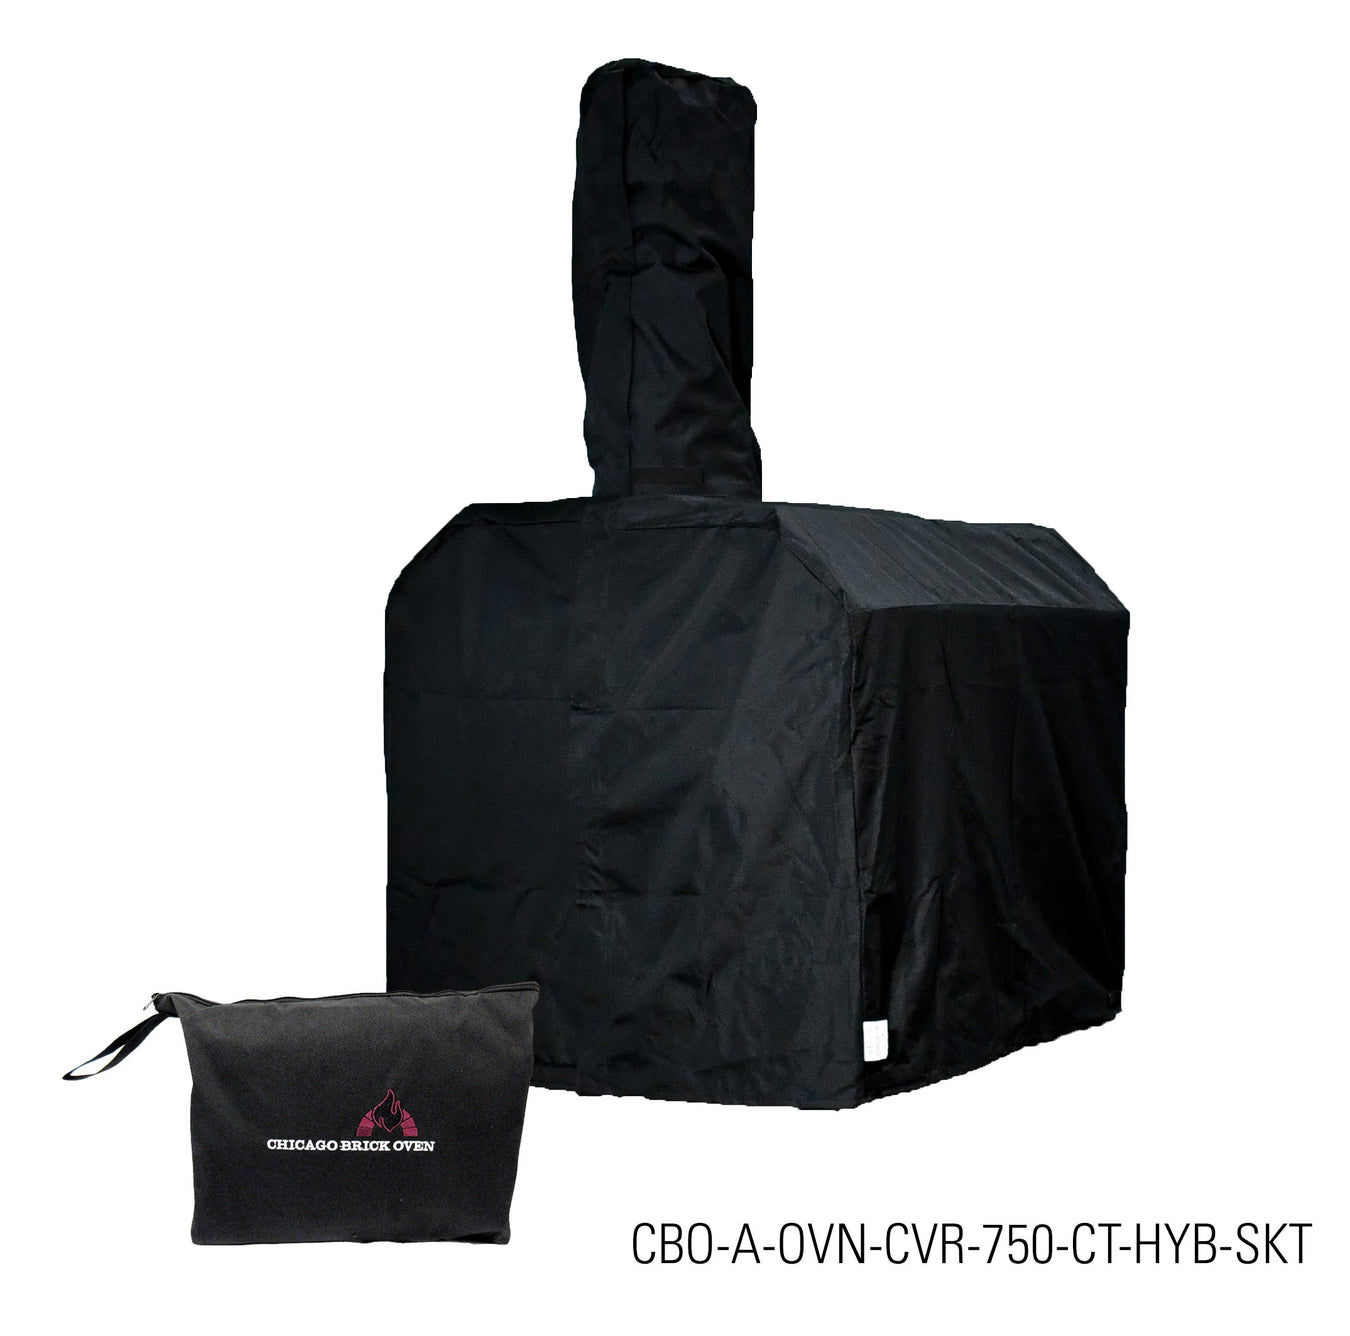 Pizza Oven Covers